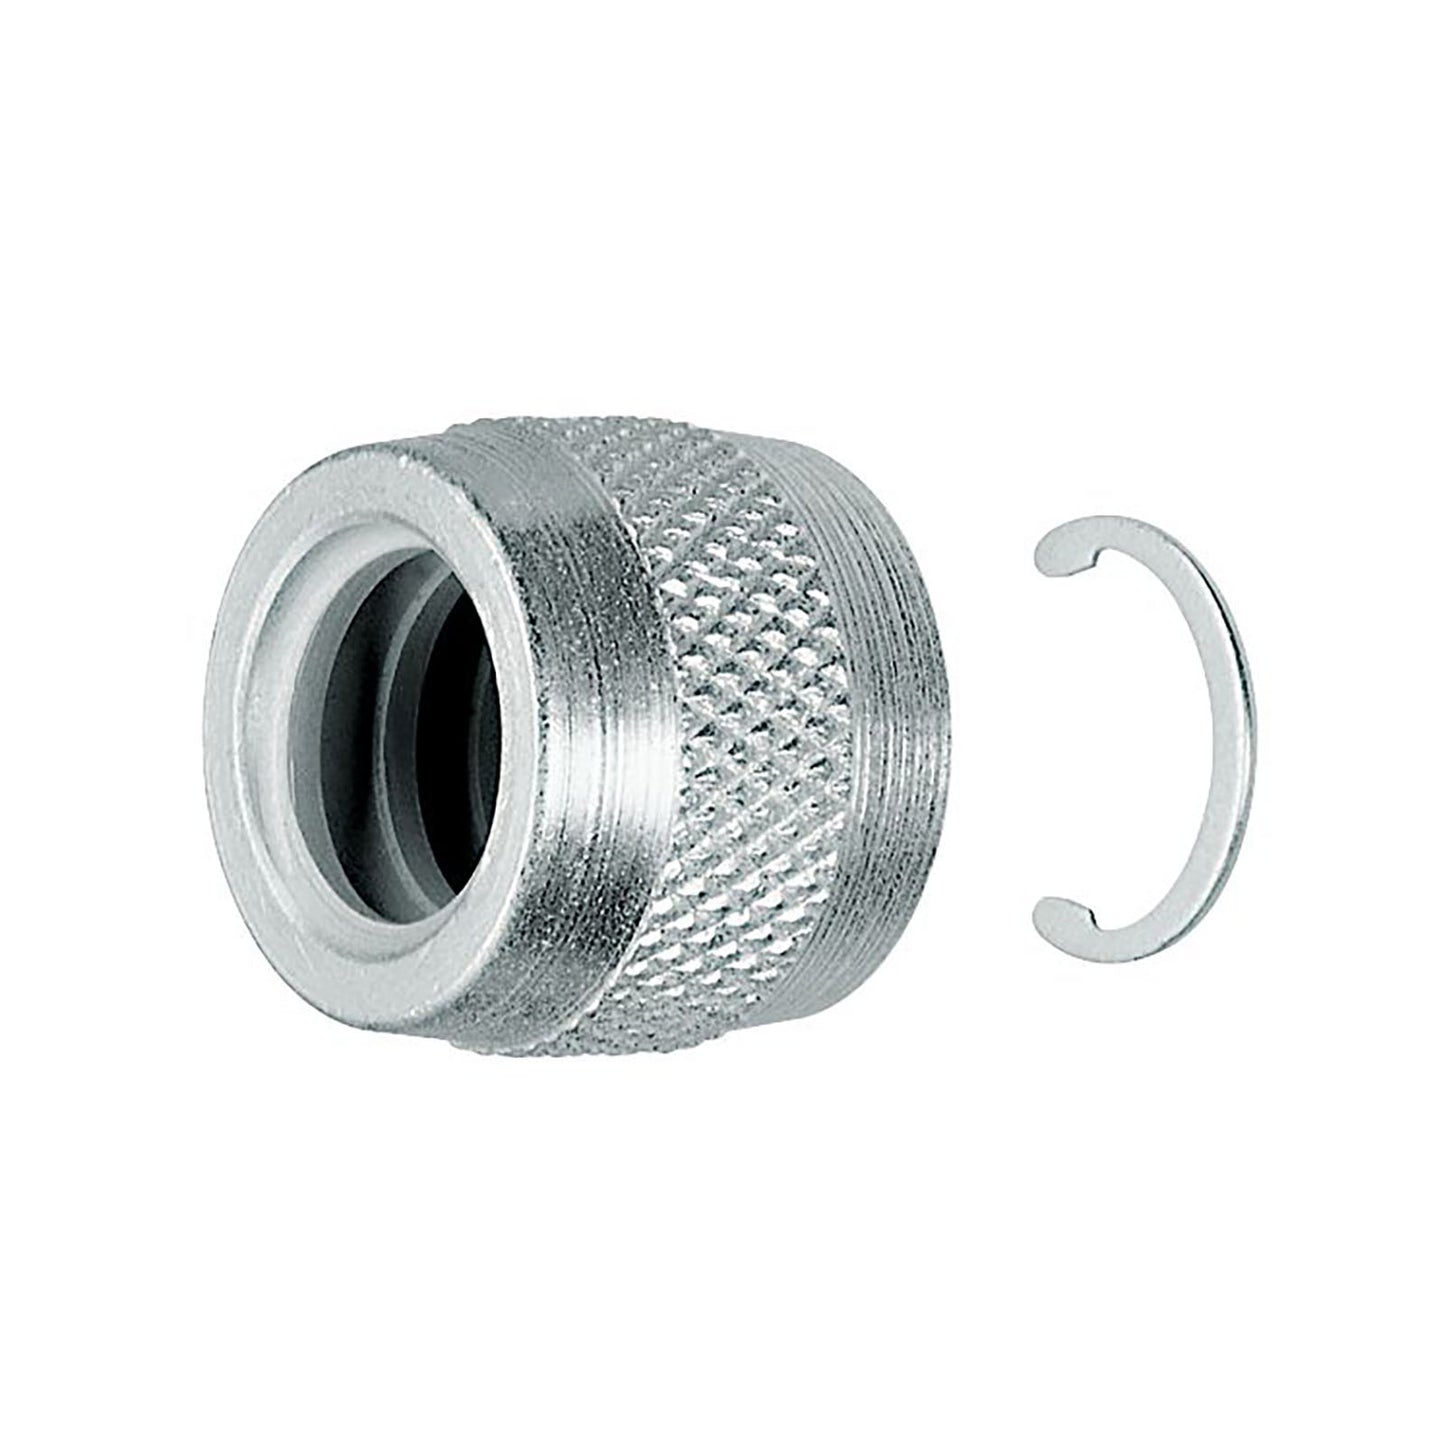 GEDORE E-100 A 1 - Knurled wheel for pliers 176 and 179 (1682938)